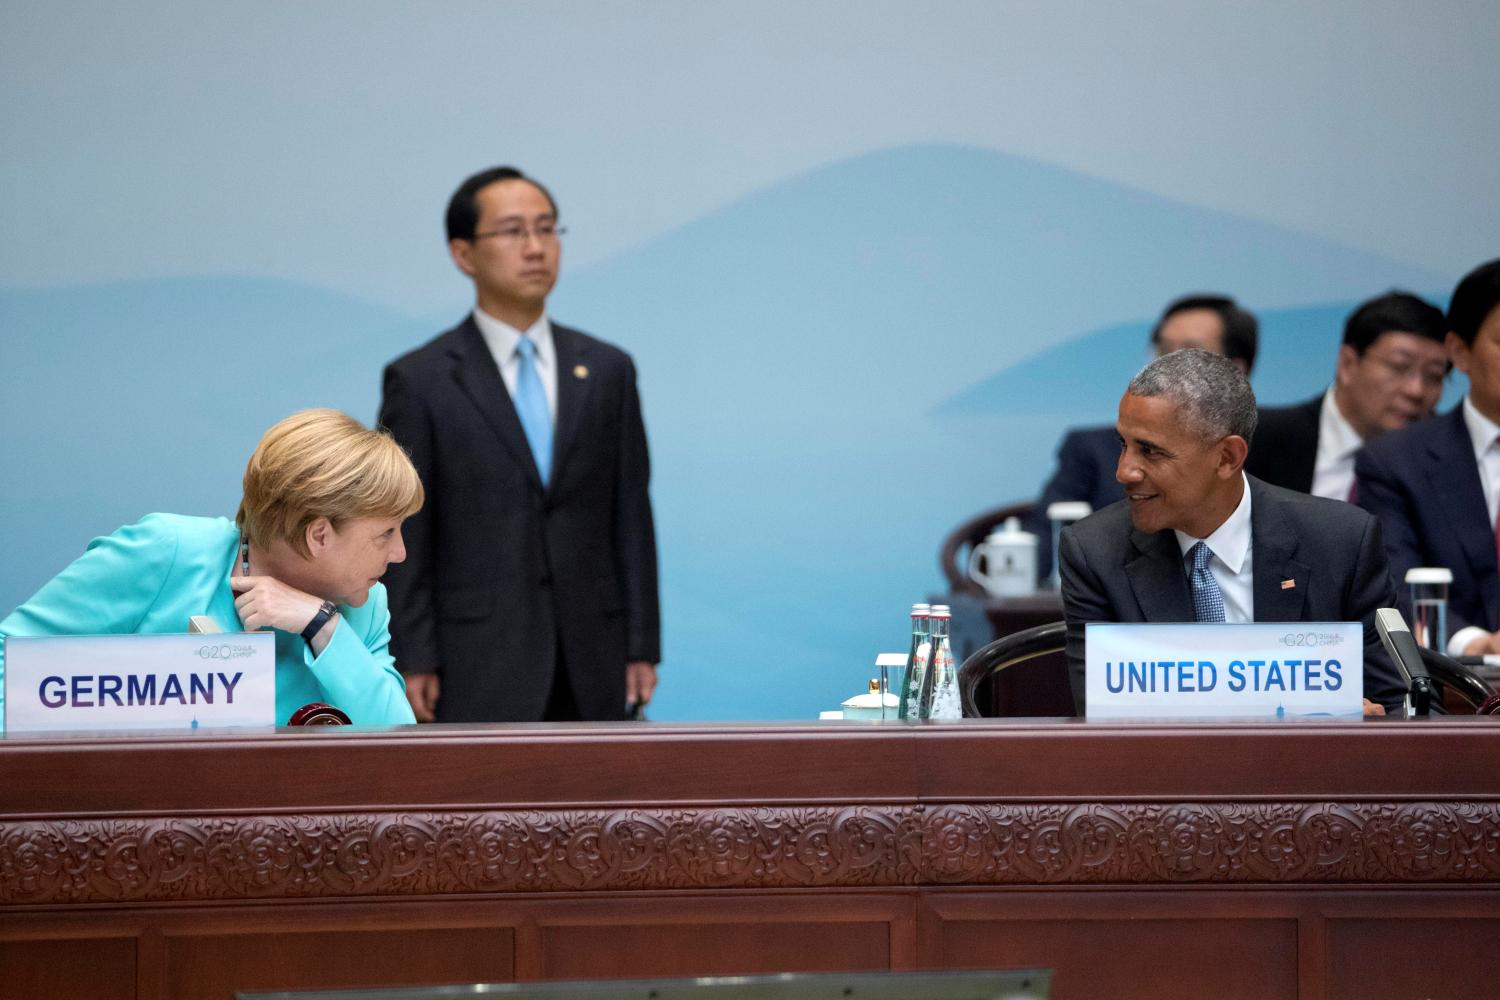 German Chancellor Angela Merkel, and U.S. President Barack Obama, talk before the start of the opening ceremony of the G-20 Summit in Hangzhou